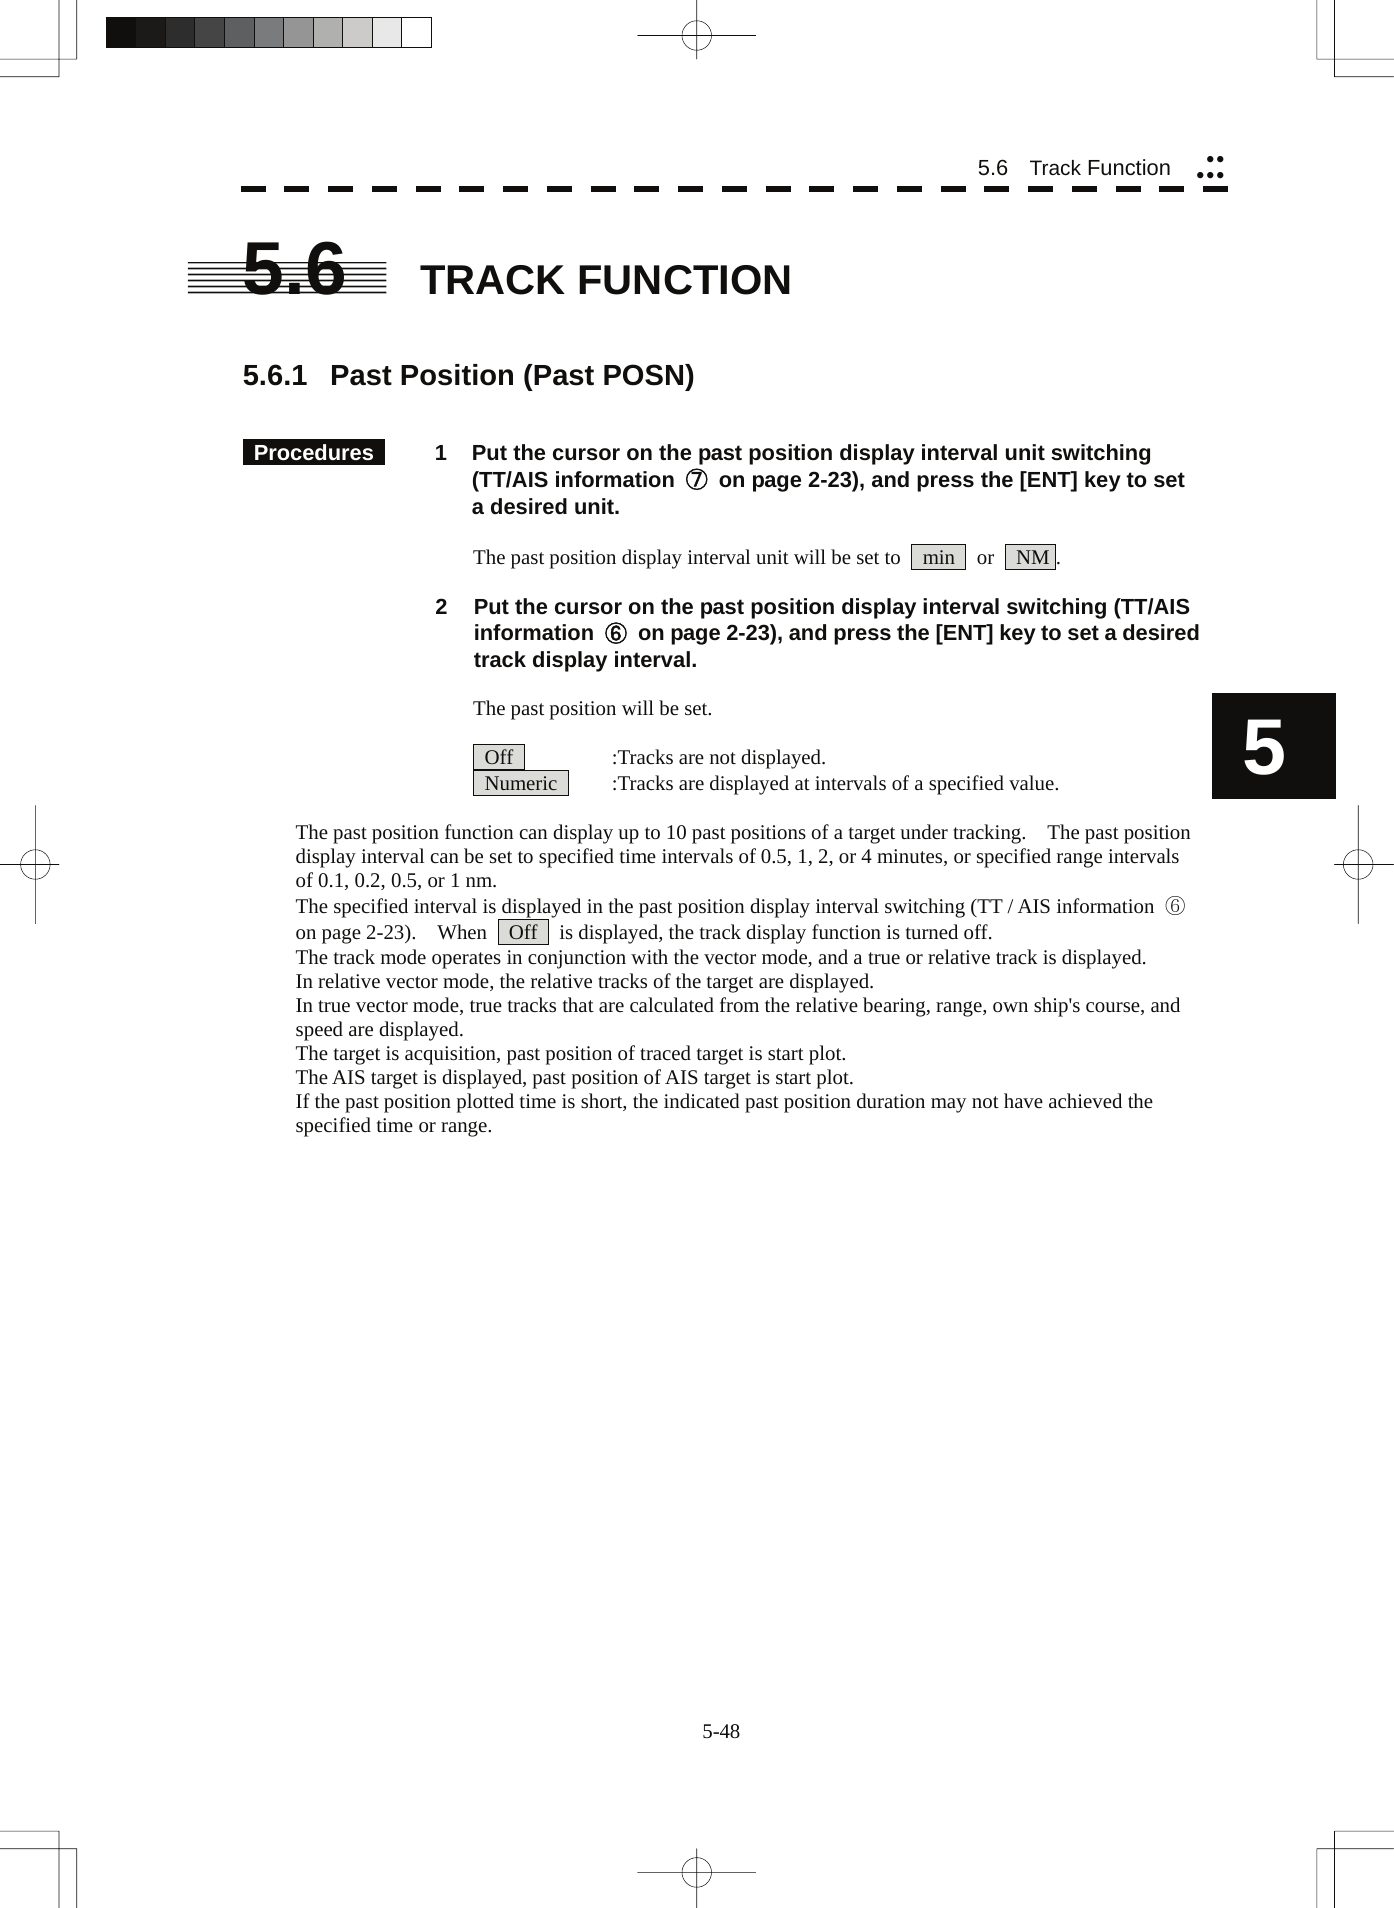  5-48 5.6   Track Function yyyyy5 5.6  TRACK FUNCTION   5.6.1  Past Position (Past POSN)    Procedures   1  Put the cursor on the past position display interval unit switching (TT/AIS information  ⑦ on page 2-23), and press the [ENT] key to set a desired unit.  The past position display interval unit will be set to    min    or    NM .  2  Put the cursor on the past position display interval switching (TT/AIS information  ⑥ on page 2-23), and press the [ENT] key to set a desired track display interval.  The past position will be set.    Off    :Tracks are not displayed.   Numeric    :Tracks are displayed at intervals of a specified value.  The past position function can display up to 10 past positions of a target under tracking.    The past position display interval can be set to specified time intervals of 0.5, 1, 2, or 4 minutes, or specified range intervals of 0.1, 0.2, 0.5, or 1 nm. The specified interval is displayed in the past position display interval switching (TT / AIS information  ⑥ on page 2-23).    When    Off    is displayed, the track display function is turned off. The track mode operates in conjunction with the vector mode, and a true or relative track is displayed. In relative vector mode, the relative tracks of the target are displayed. In true vector mode, true tracks that are calculated from the relative bearing, range, own ship&apos;s course, and speed are displayed. The target is acquisition, past position of traced target is start plot. The AIS target is displayed, past position of AIS target is start plot. If the past position plotted time is short, the indicated past position duration may not have achieved the specified time or range. 